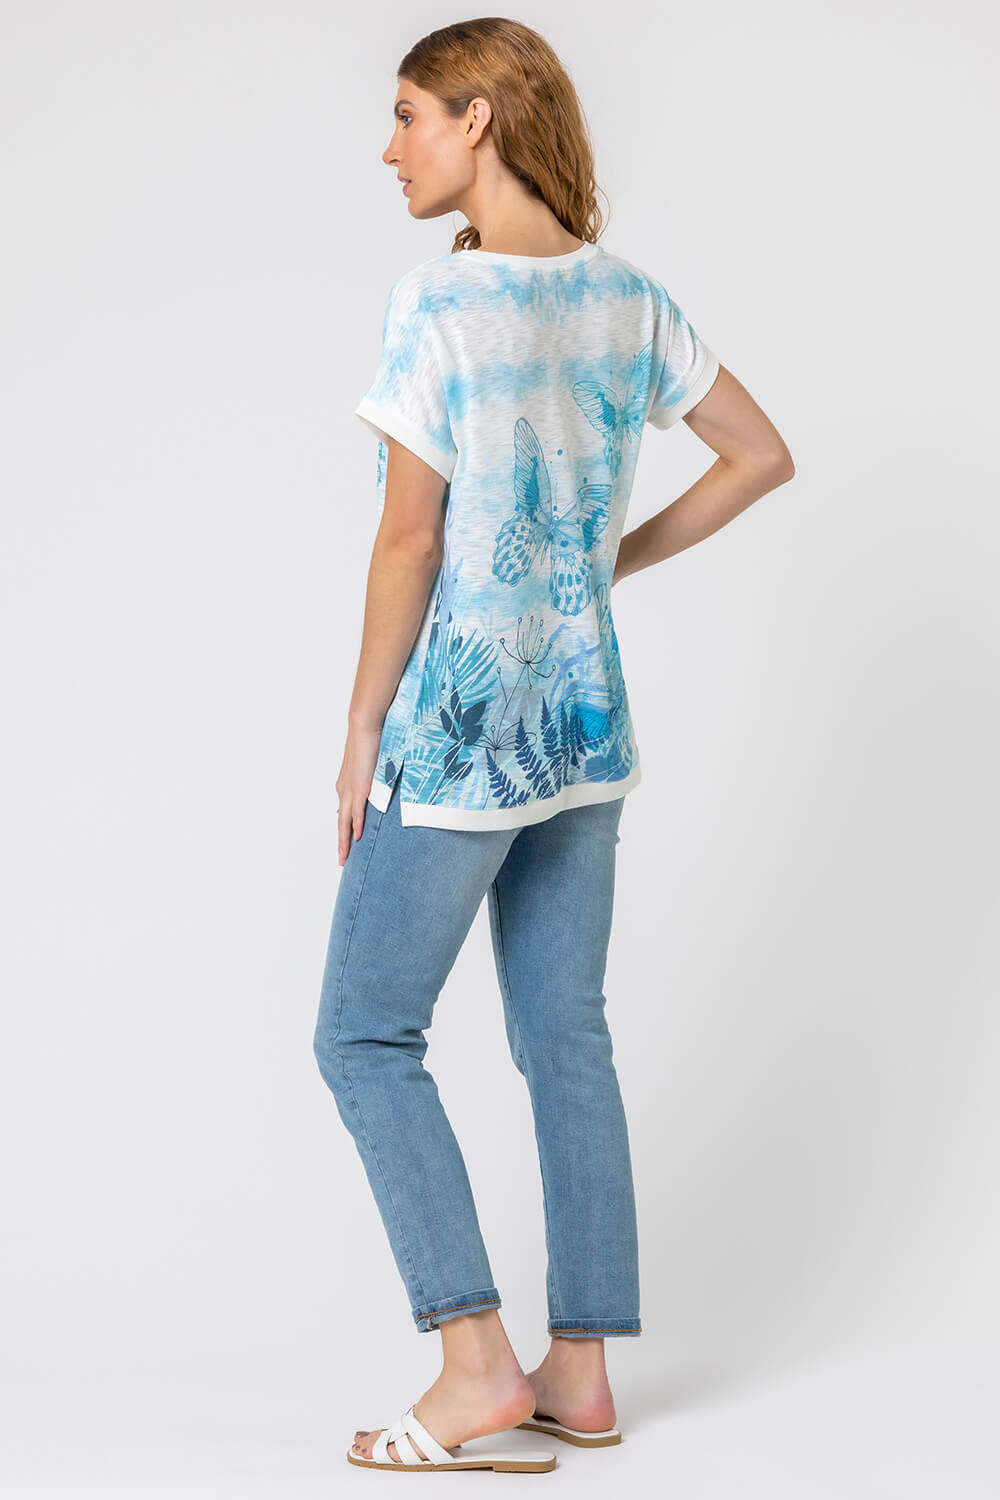 Blue Butterfly Embelished Print T-Shirt, Image 2 of 4